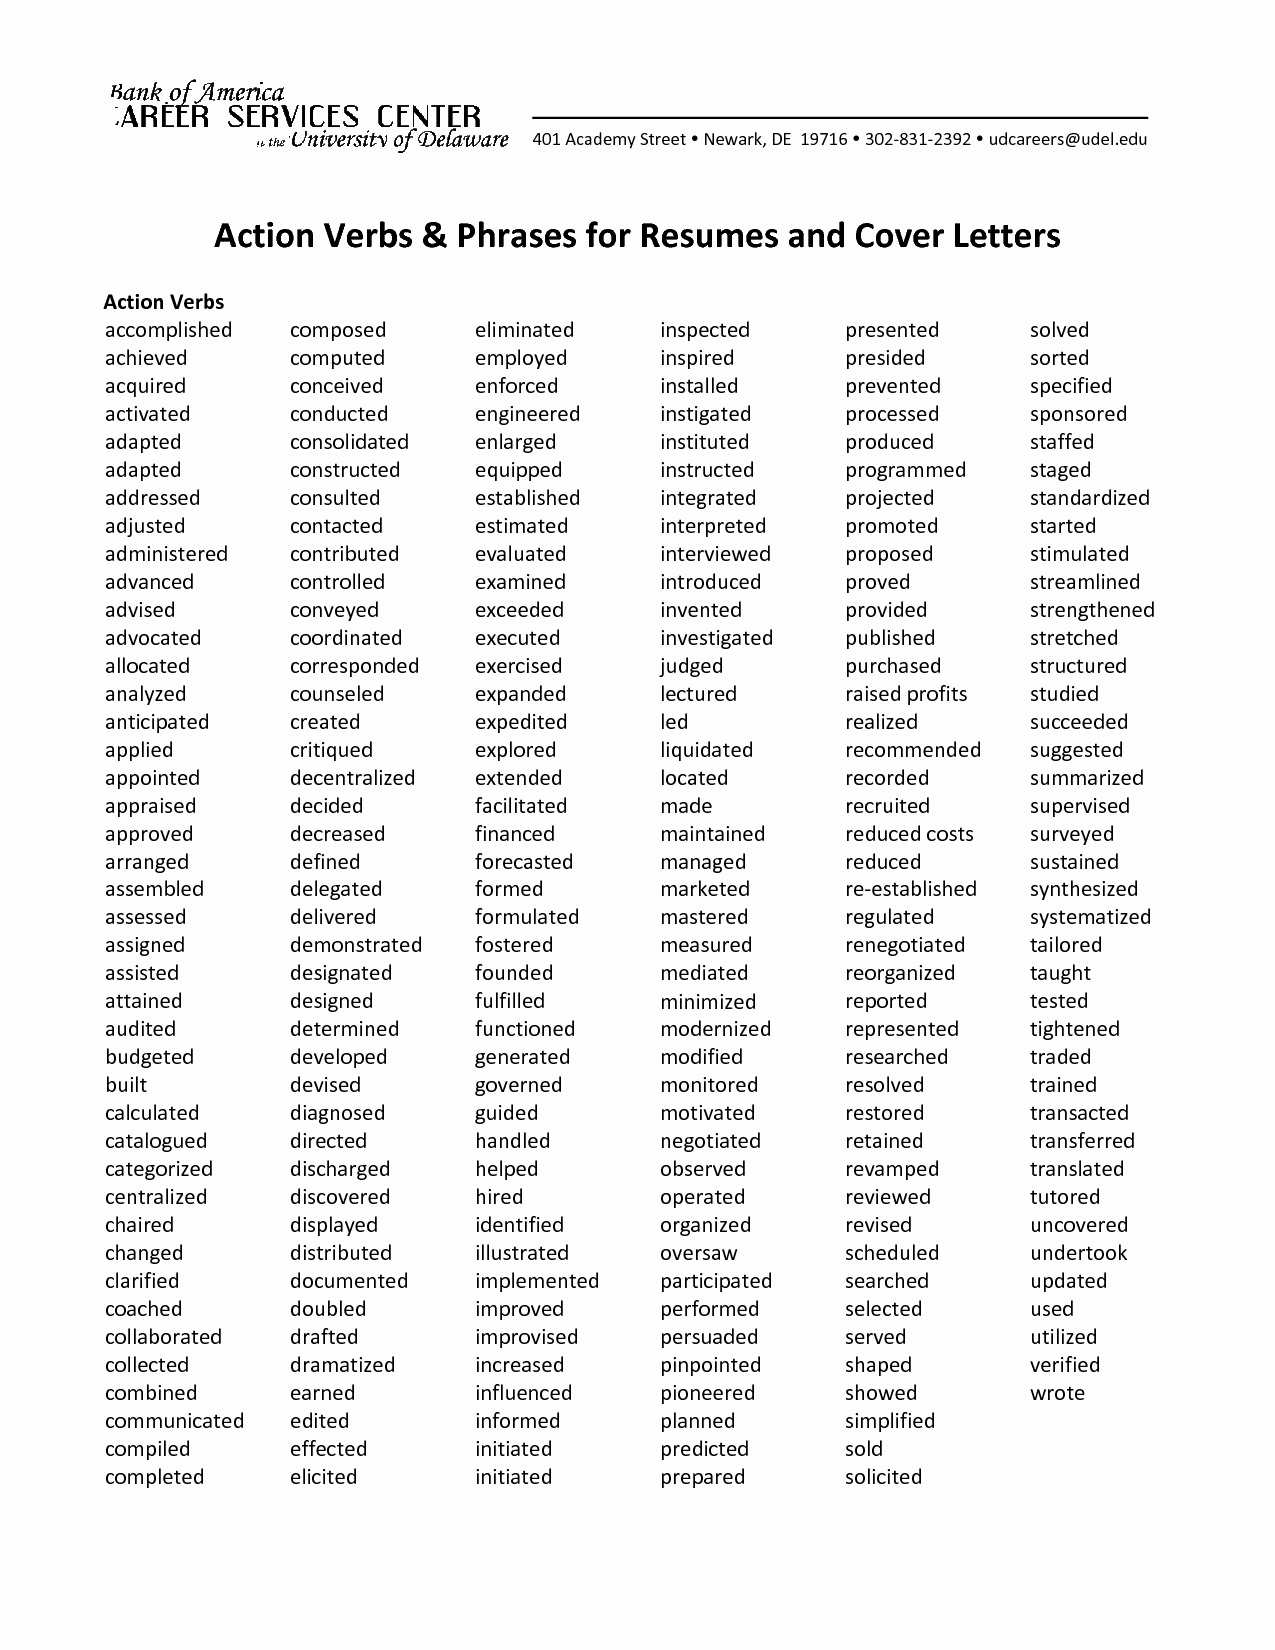 Action Verbs Phrases for Resumes and Cover Letters